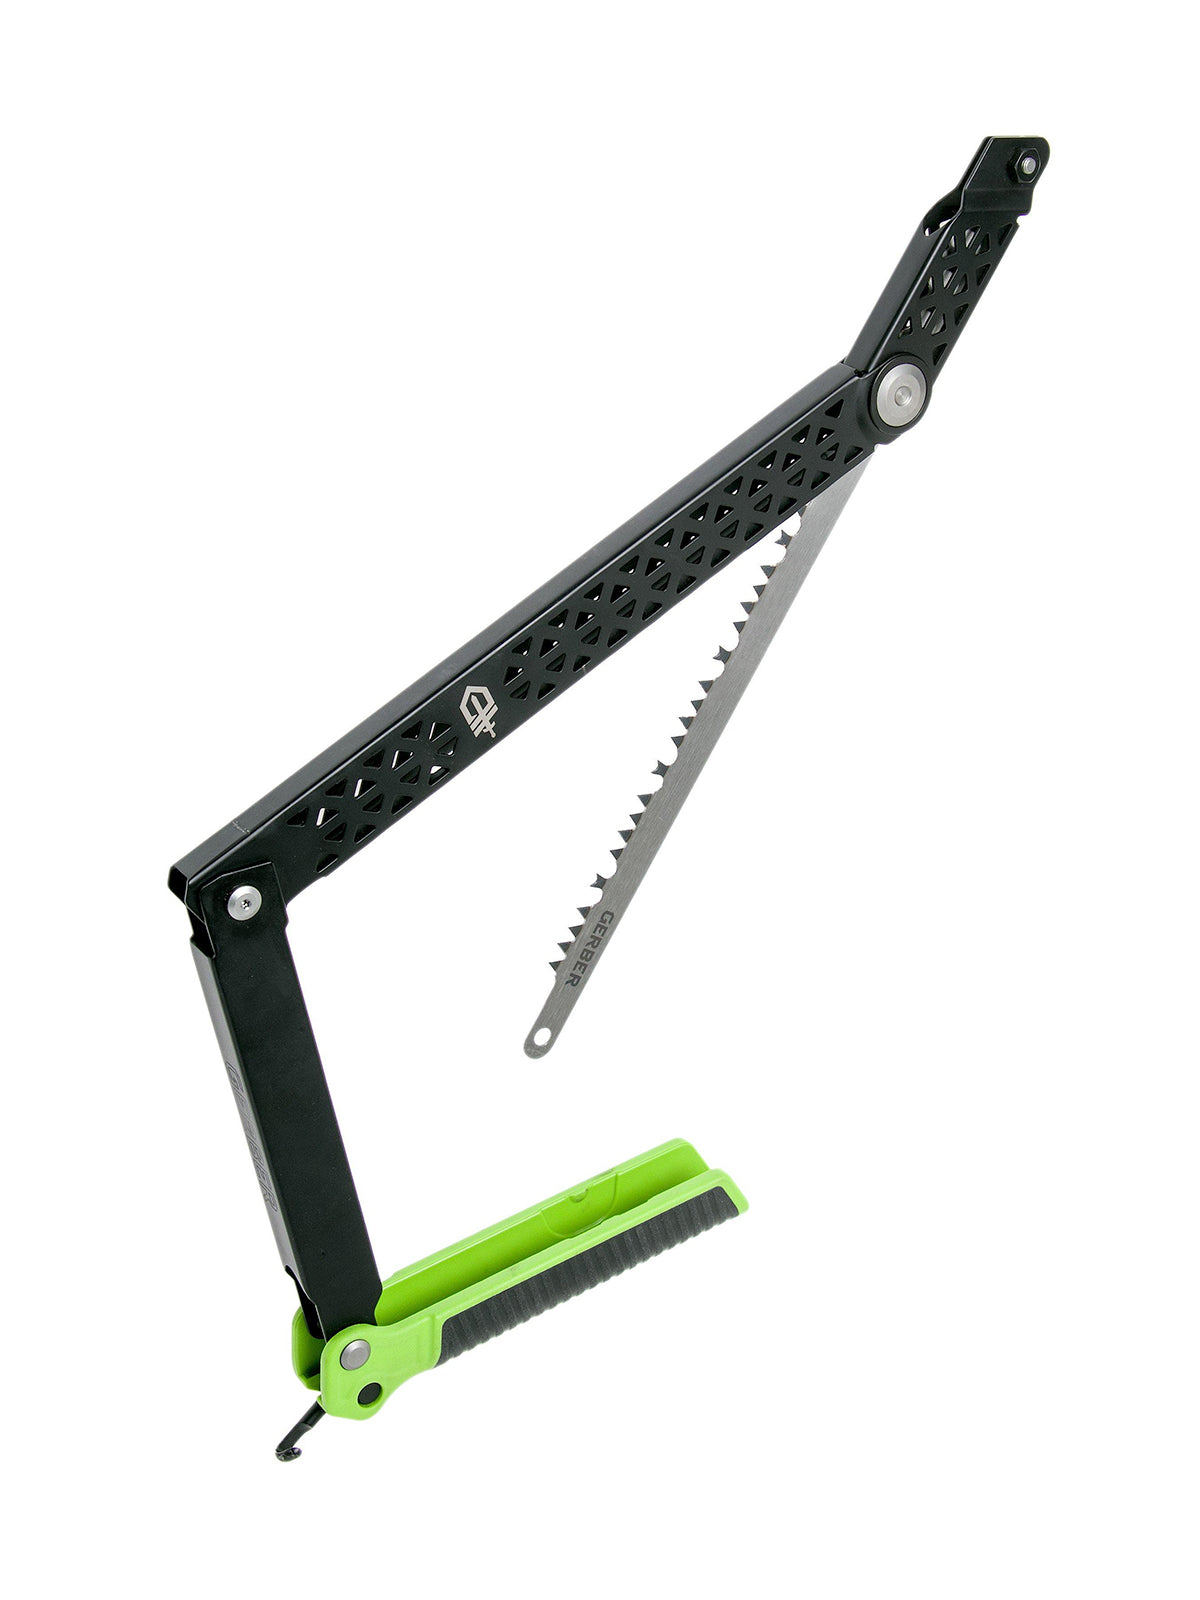 Gerber Freescape Folding Camp Saw being unfolded